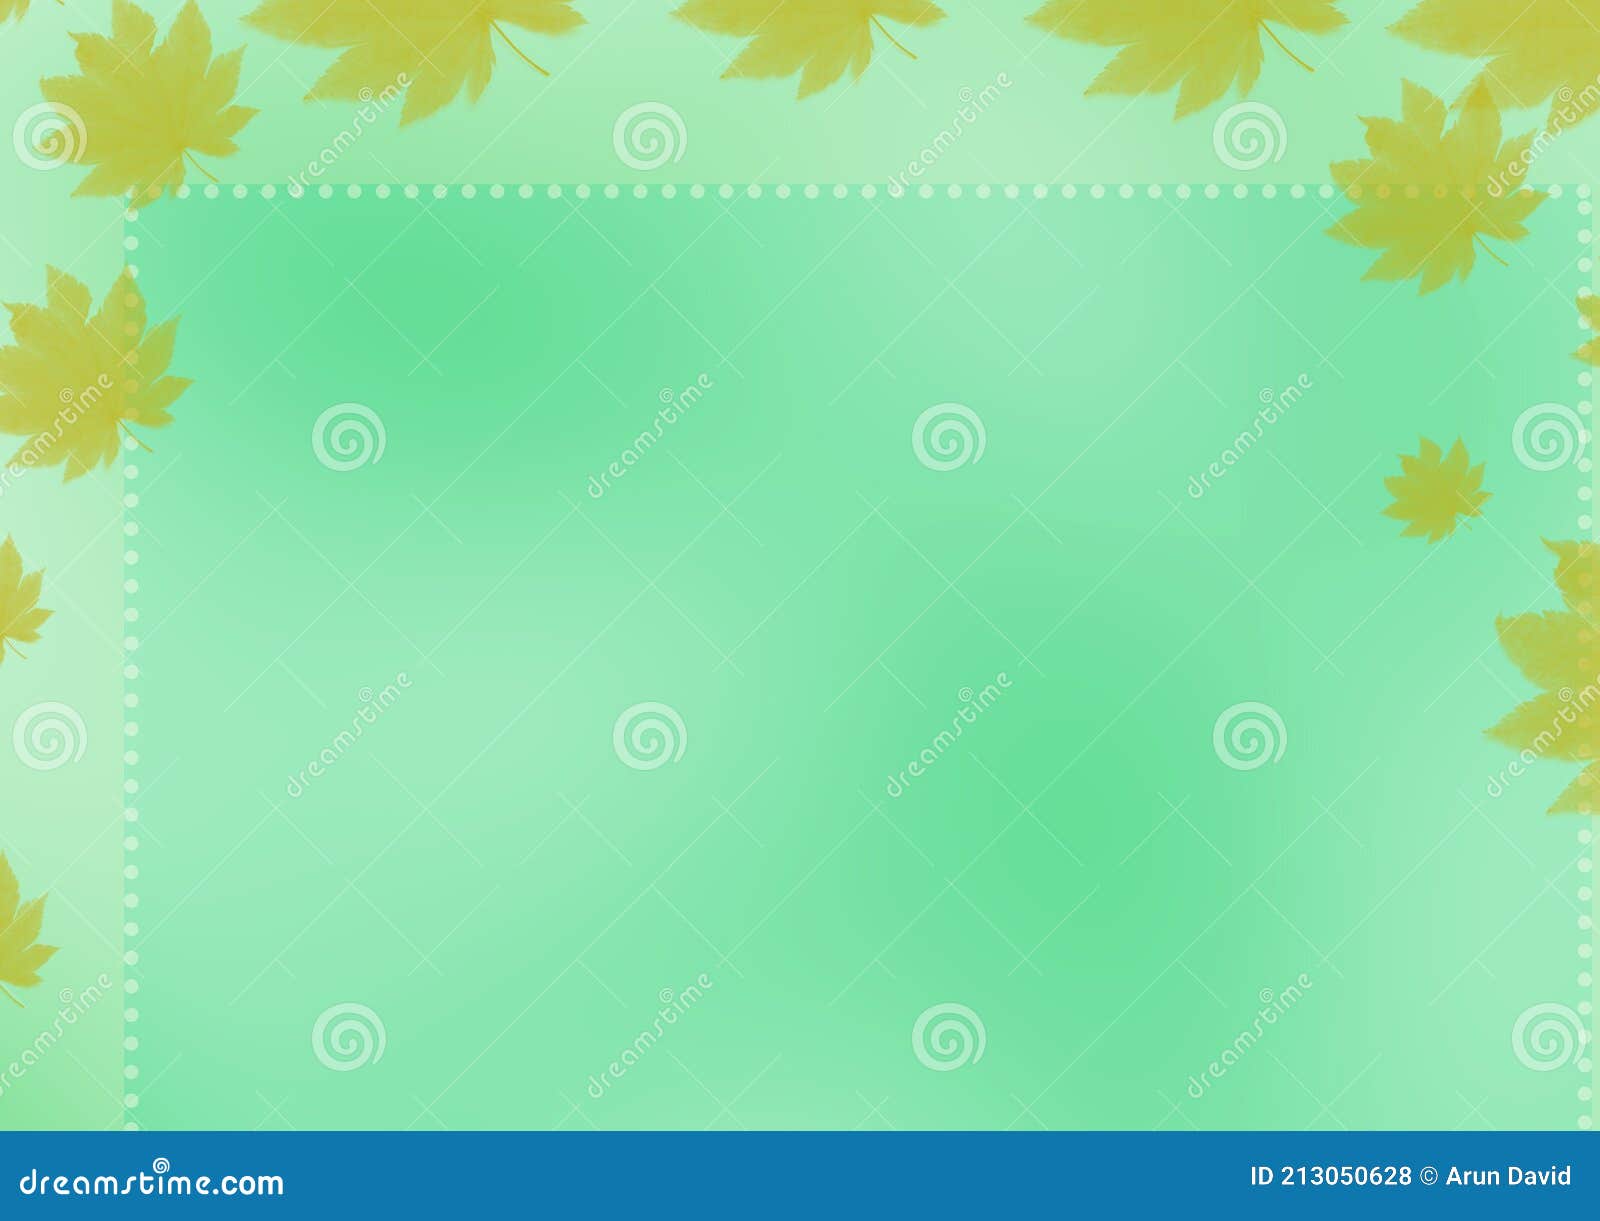 Quotes Background and Empty Space Quote Maker Like Green Background Stock  Illustration - Illustration of drawing, empty: 213050628